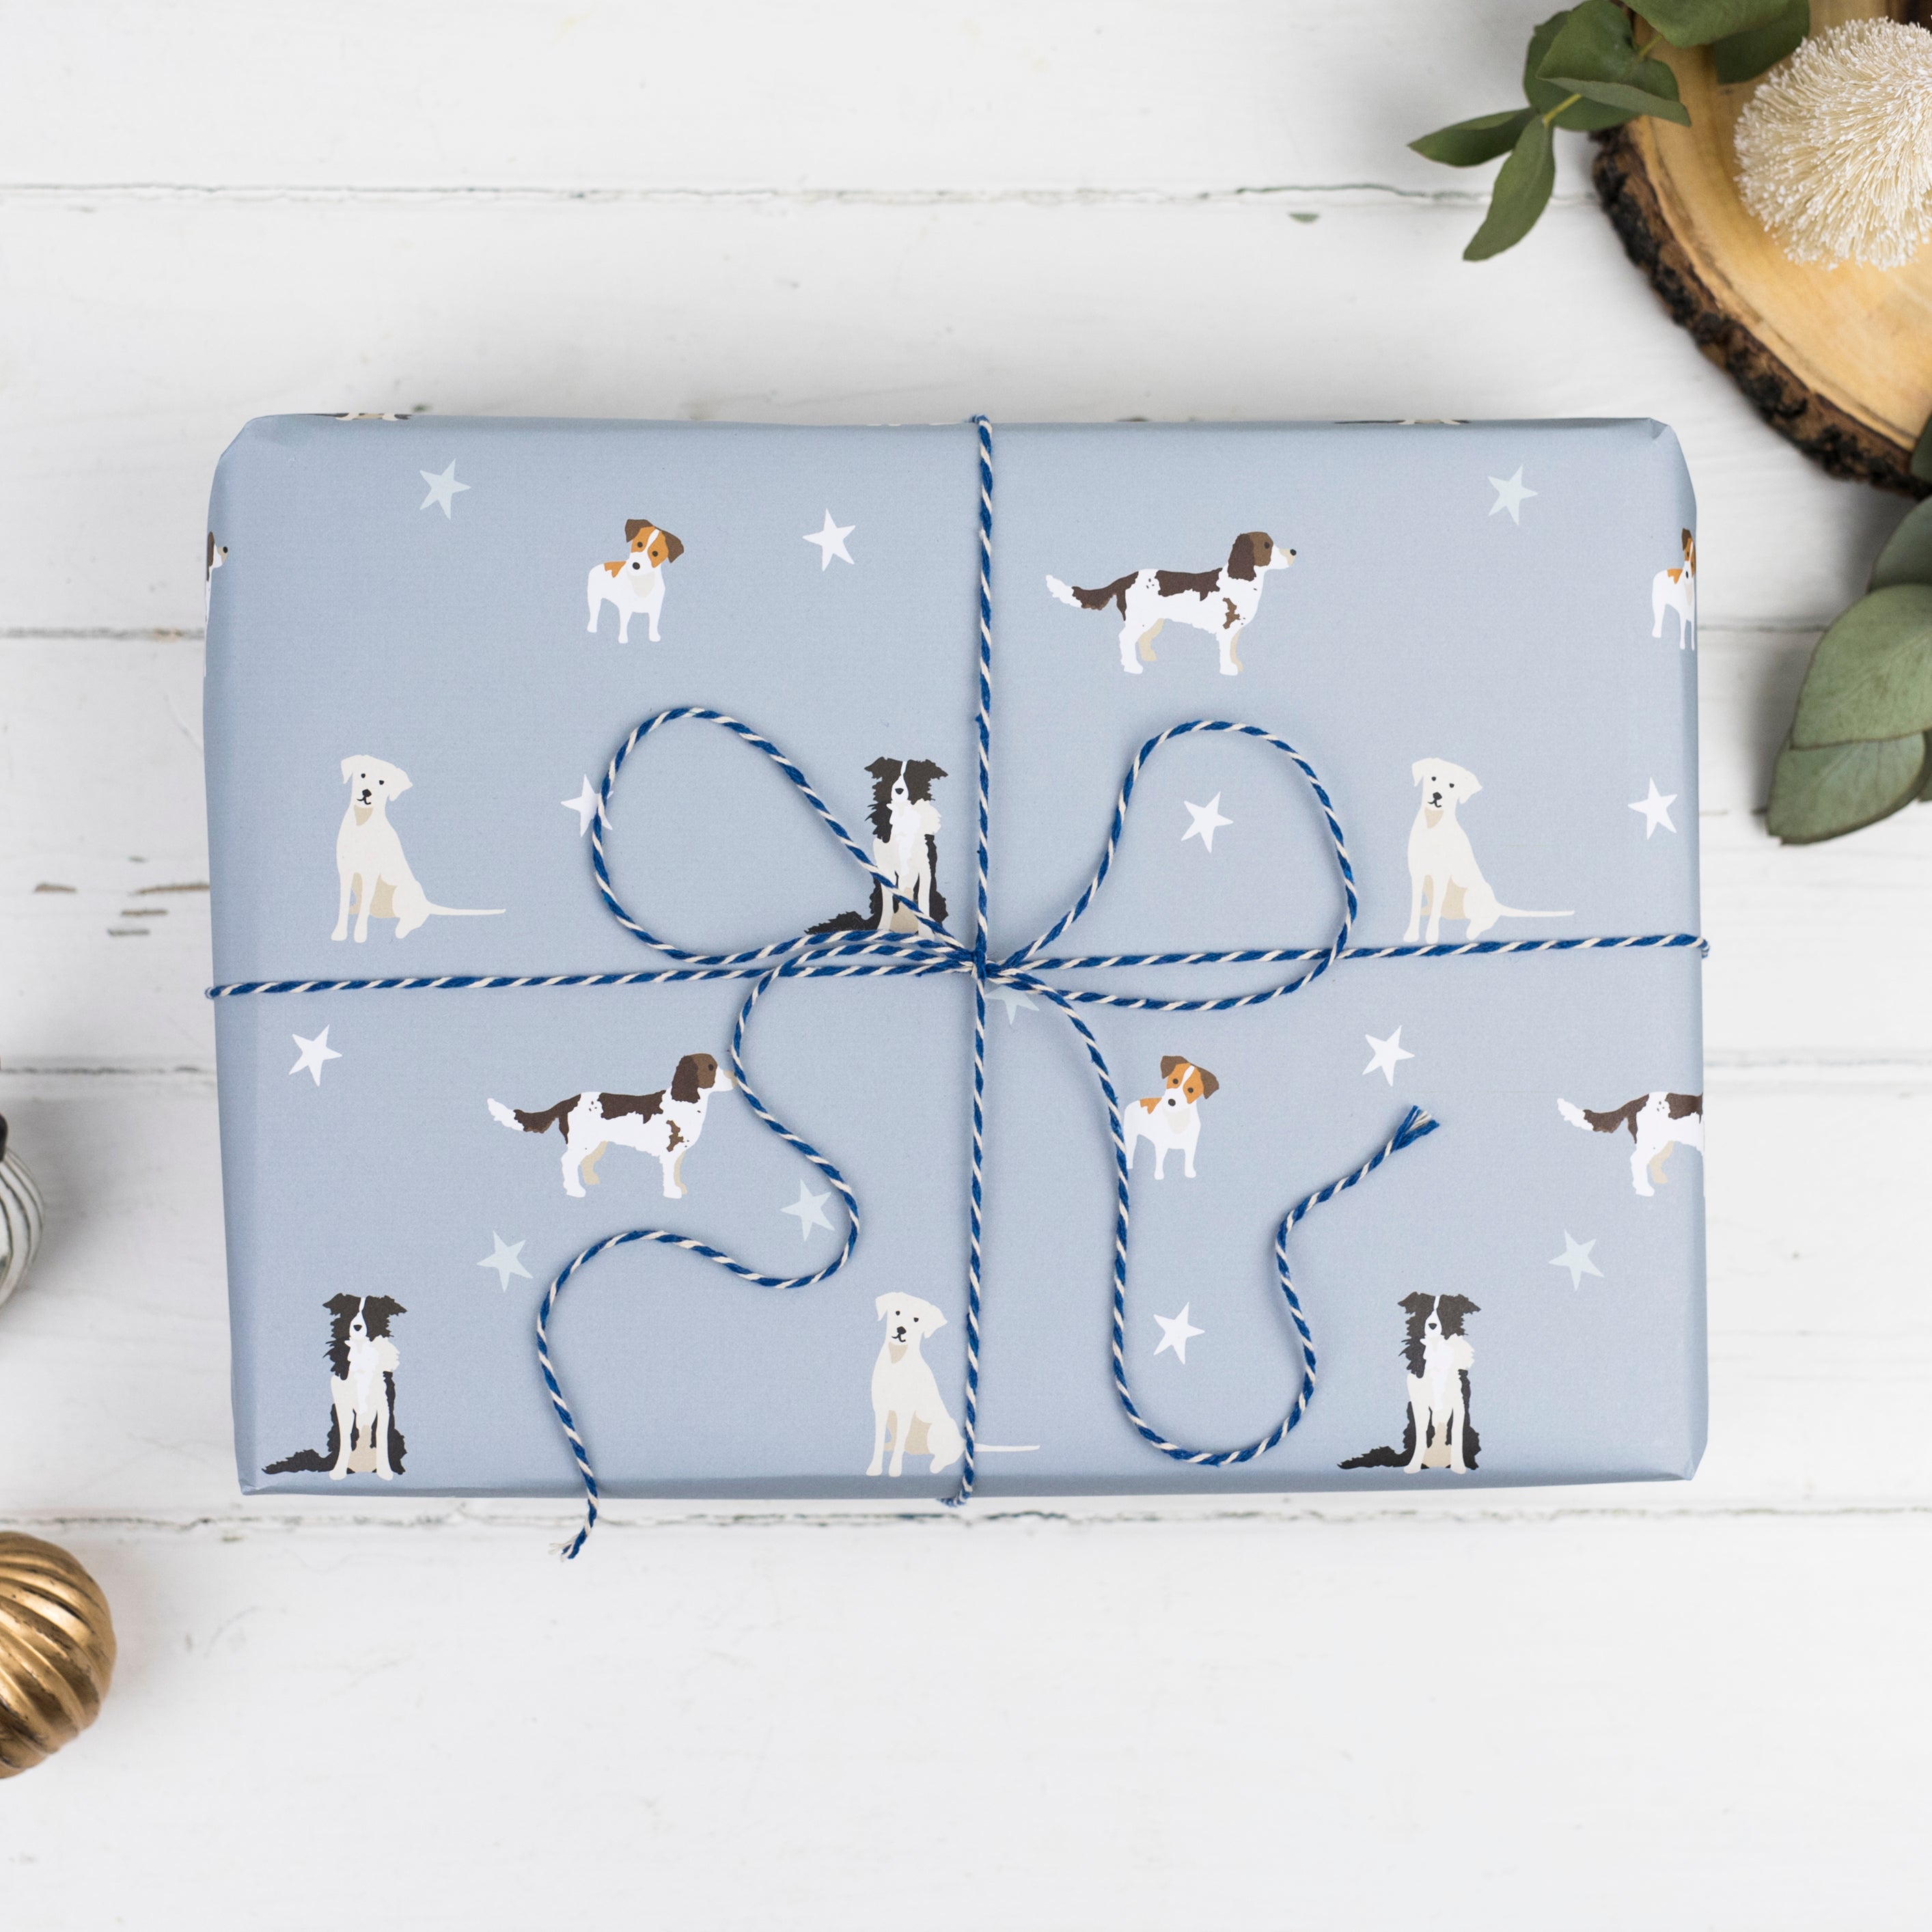 Present wrapped in Rebecca PItcher's Dog design wrapping paper